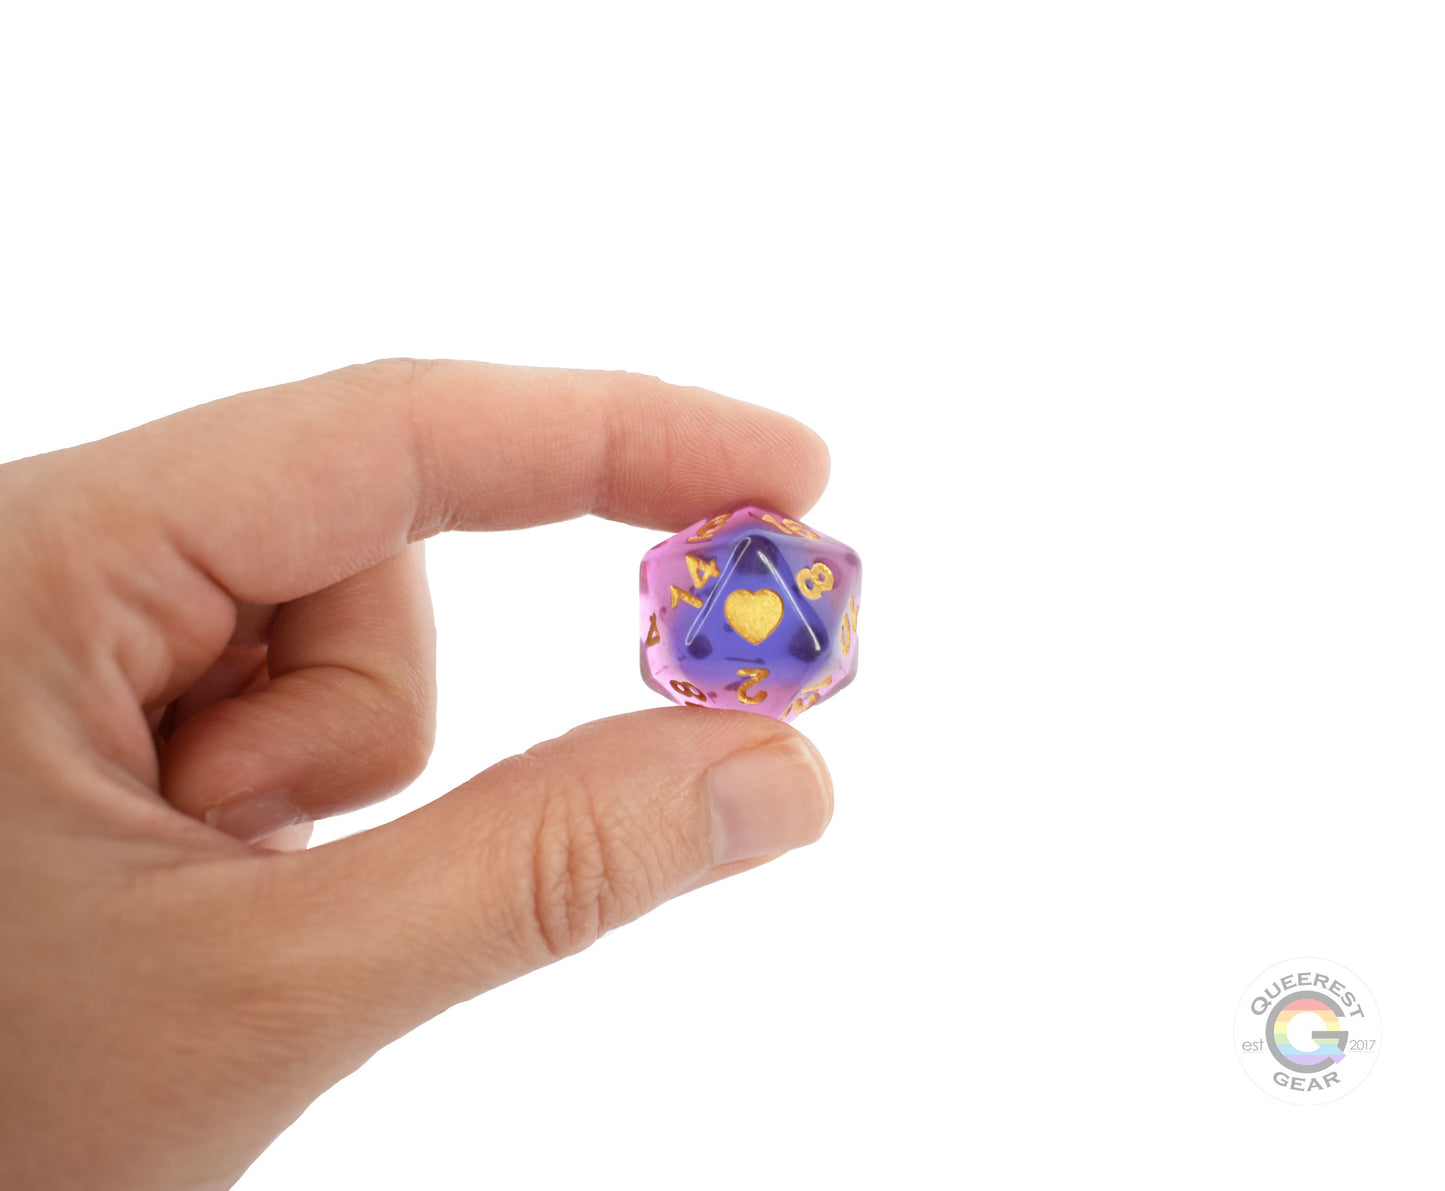 A hand holding up the genderfluid d20 to show off the color, heart, and transparency